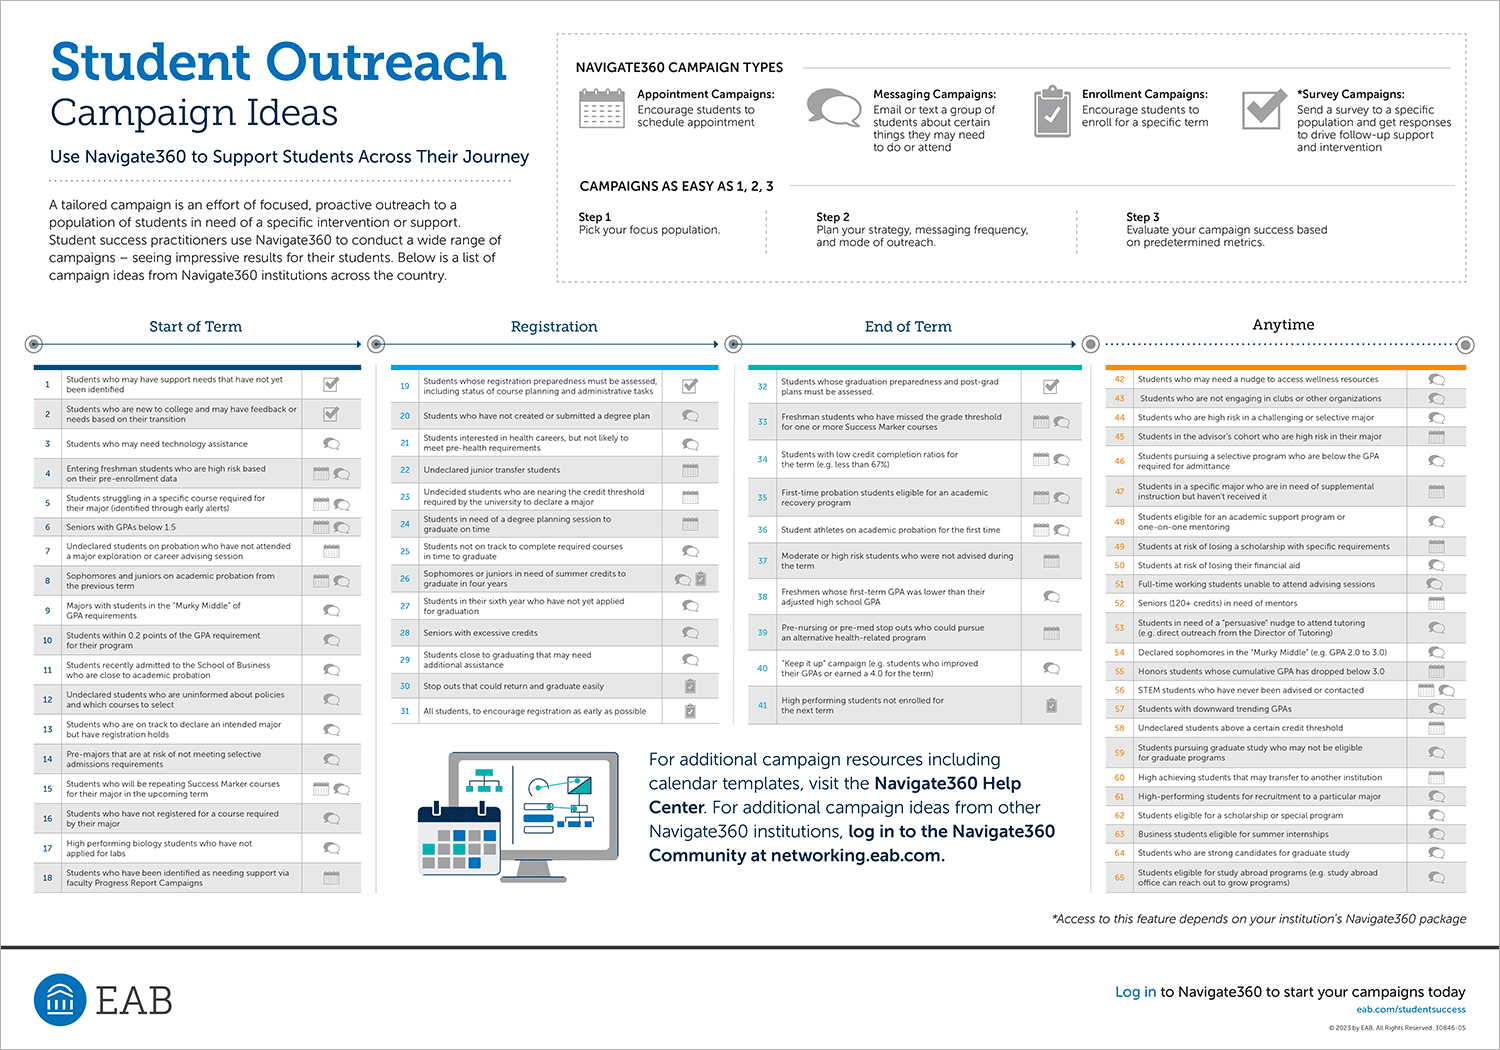 Student Outreach Campaign Ideas infographic